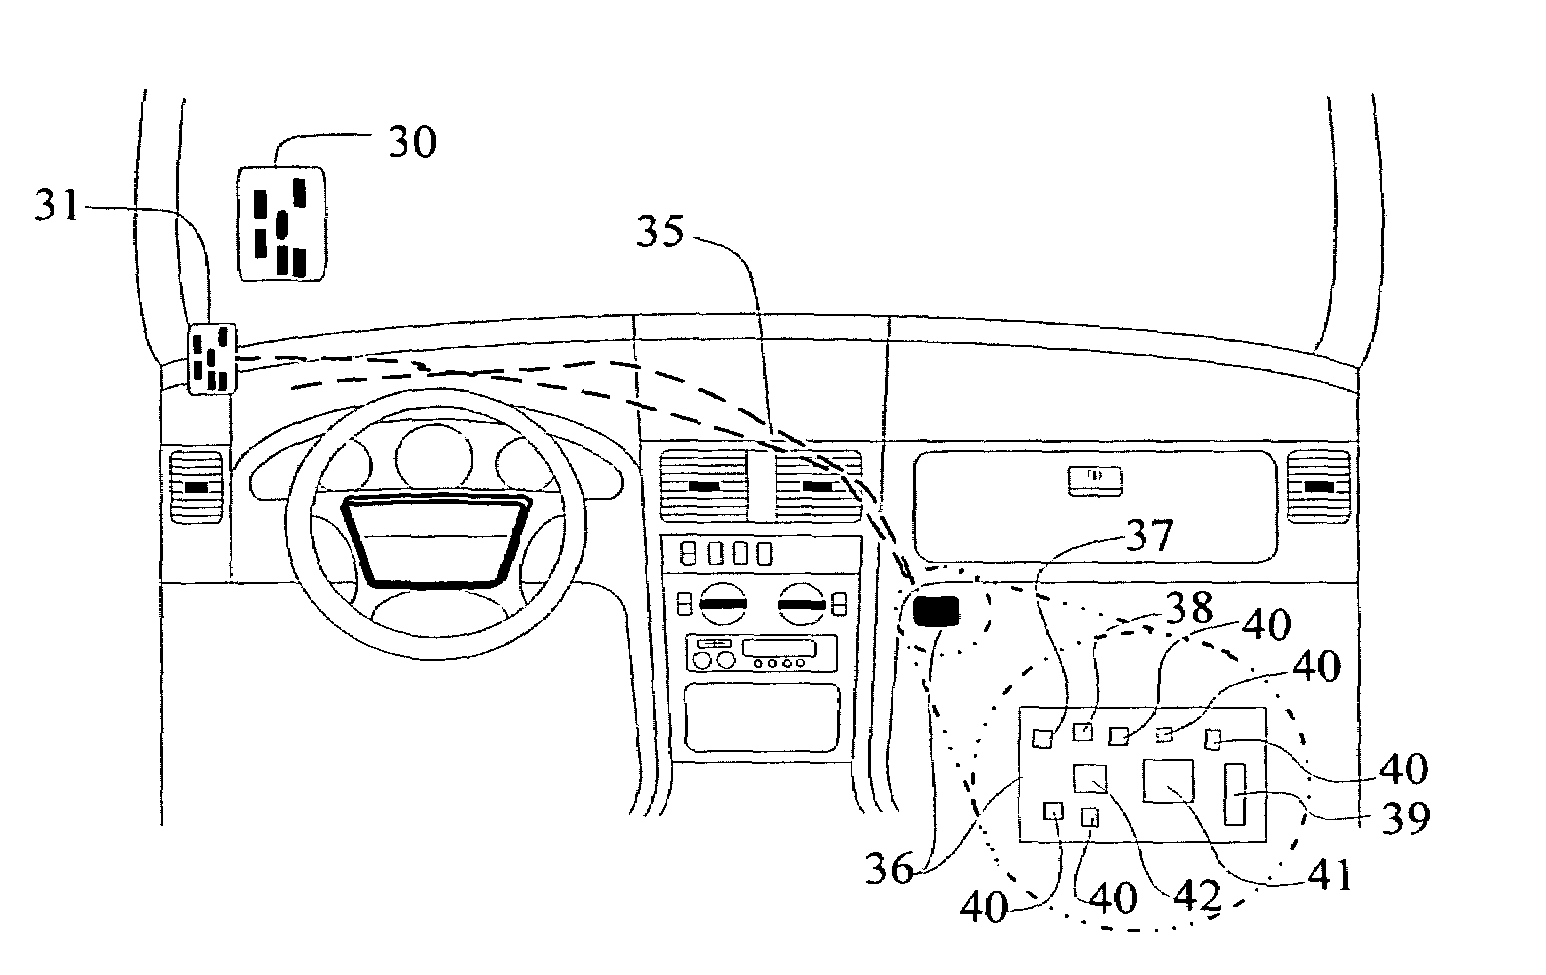 Method for obtaining and displaying information about objects in a vehicular blind spot